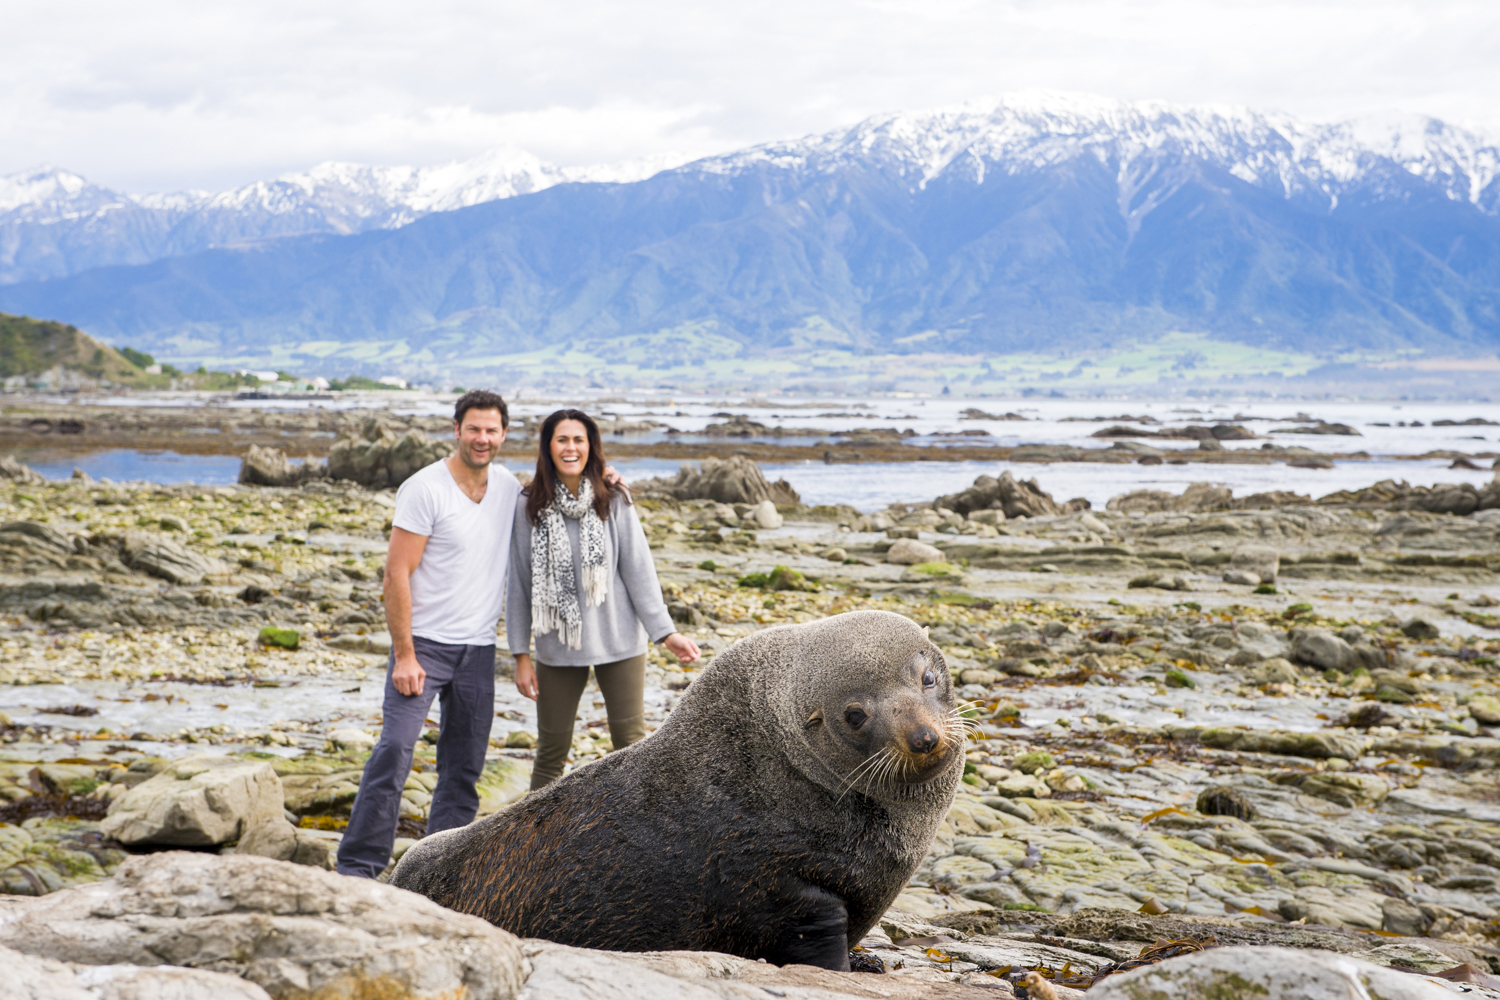 There maybe more fur seals then residents in Kaikoura.